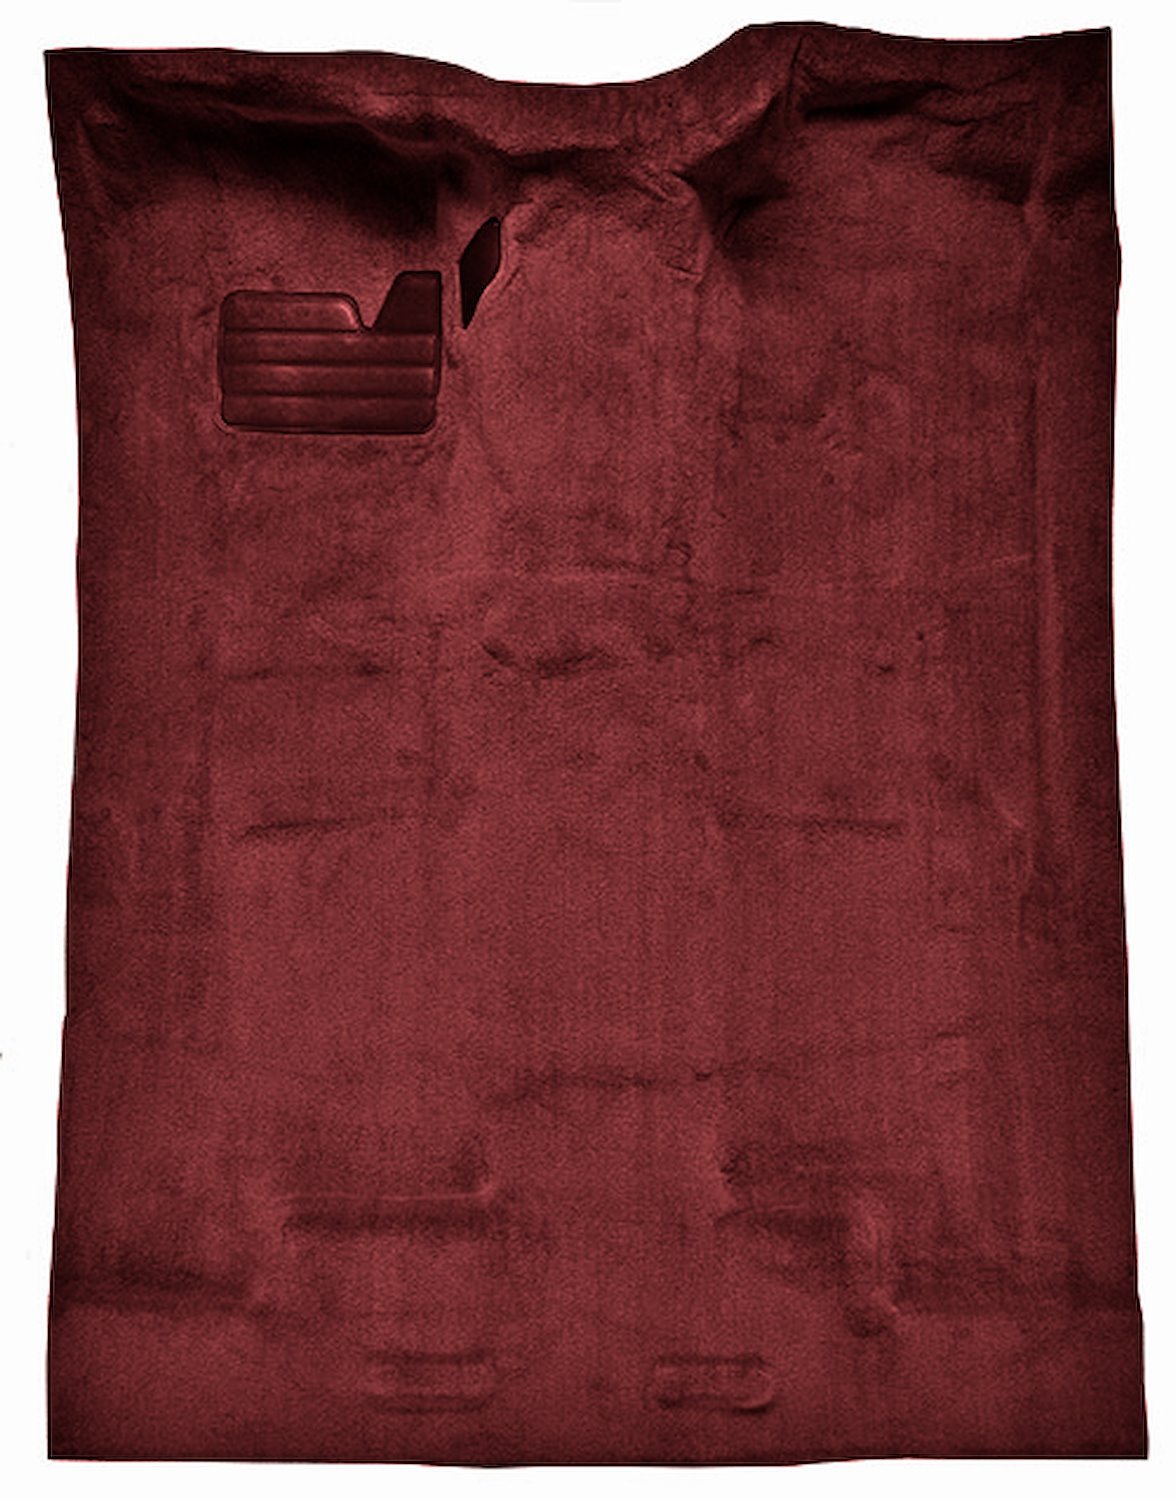 Molded Cut Pile Carpet for 1988-2002 Chevrolet/GMC C/K Series Trucks [Mass Backing, Extended Cab, 1-Piece, Maroon]